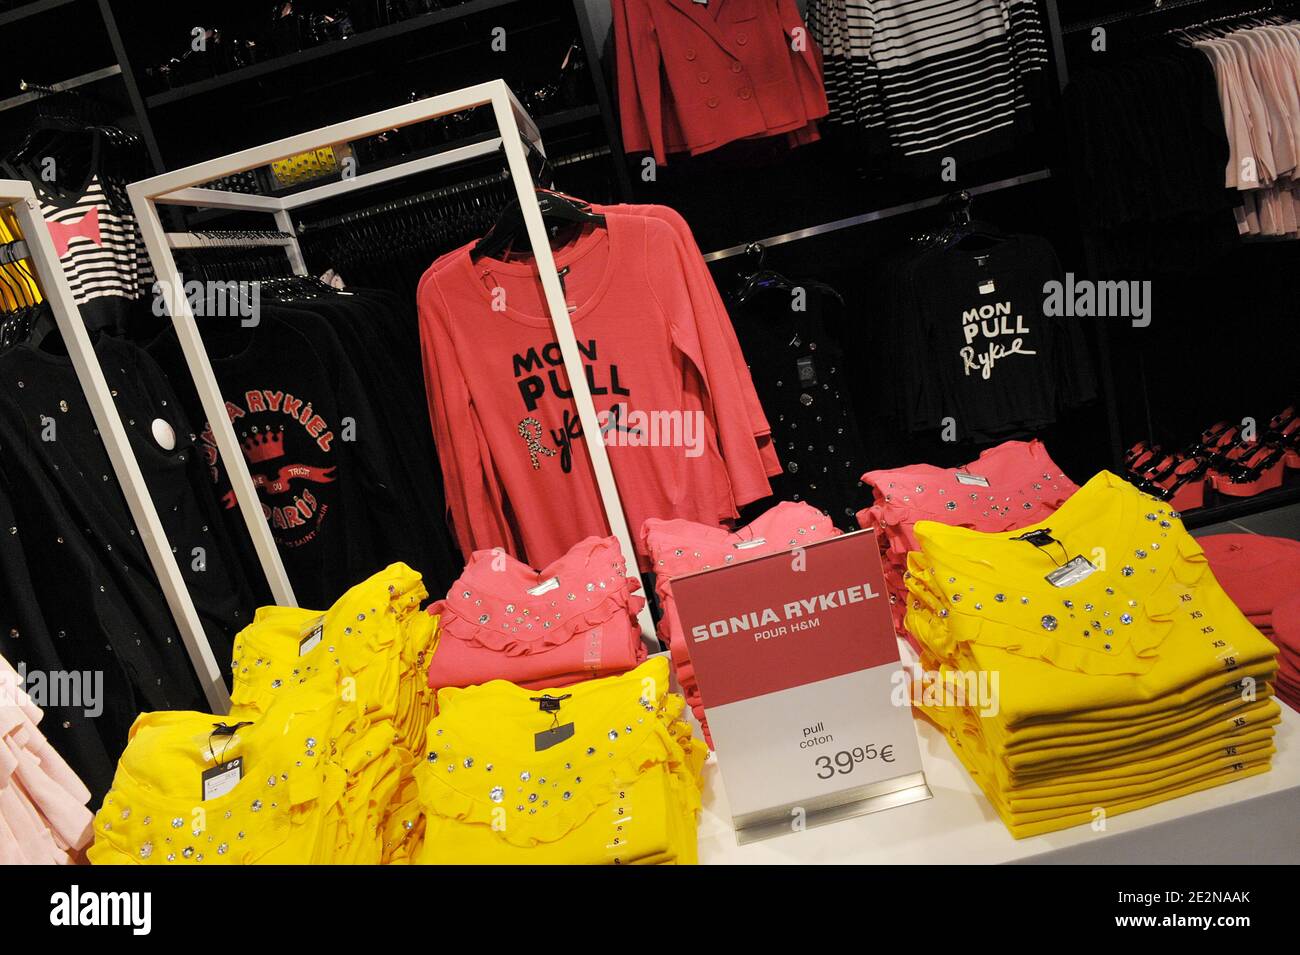 People rush to get clothes in a H&M store stocking the new collection  designed by French designer Sonia Rykiel for H&M. Rykiel's line for H&M,  launched today in several stores, starts at